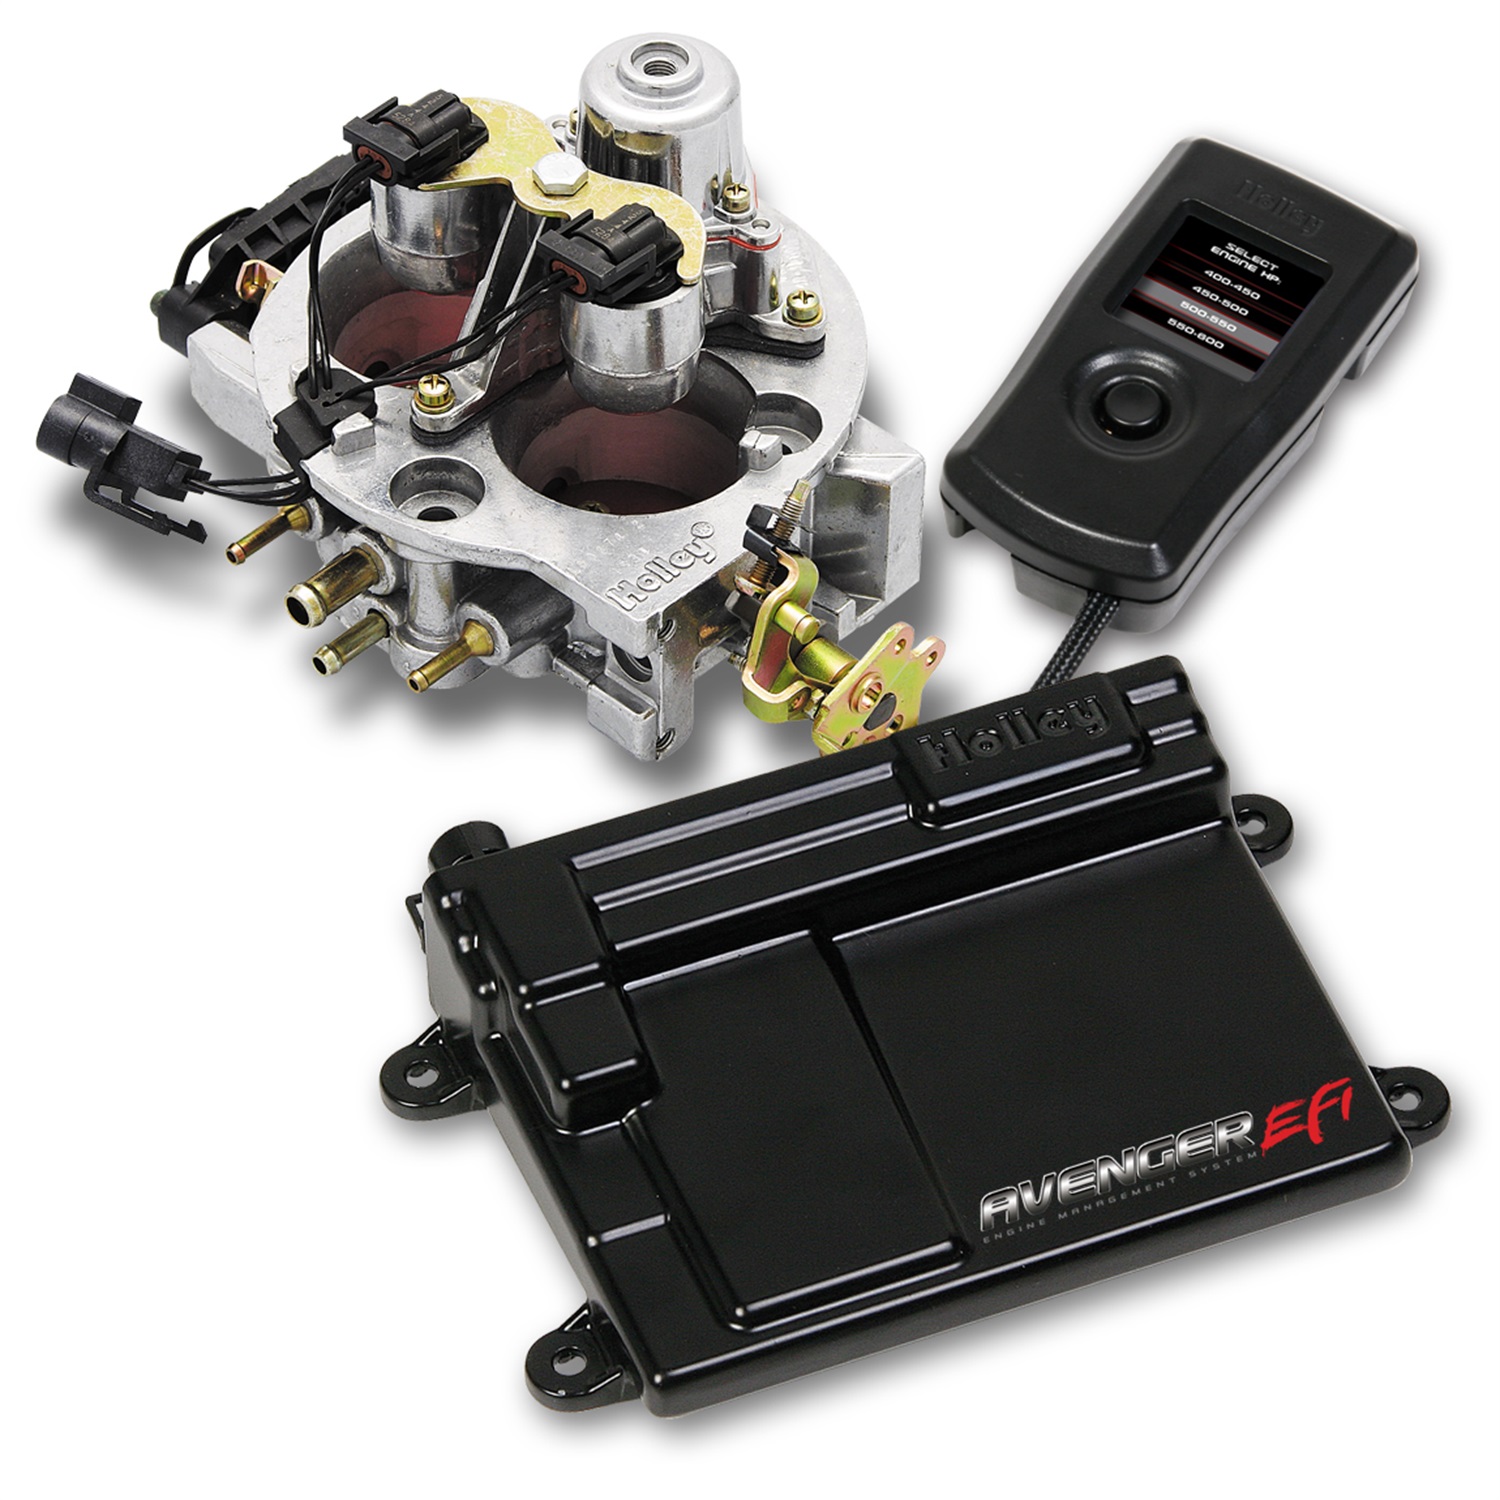 Holley Performance Holley Performance 550-400 Avenger EFI Throttle Body Fuel Injection System